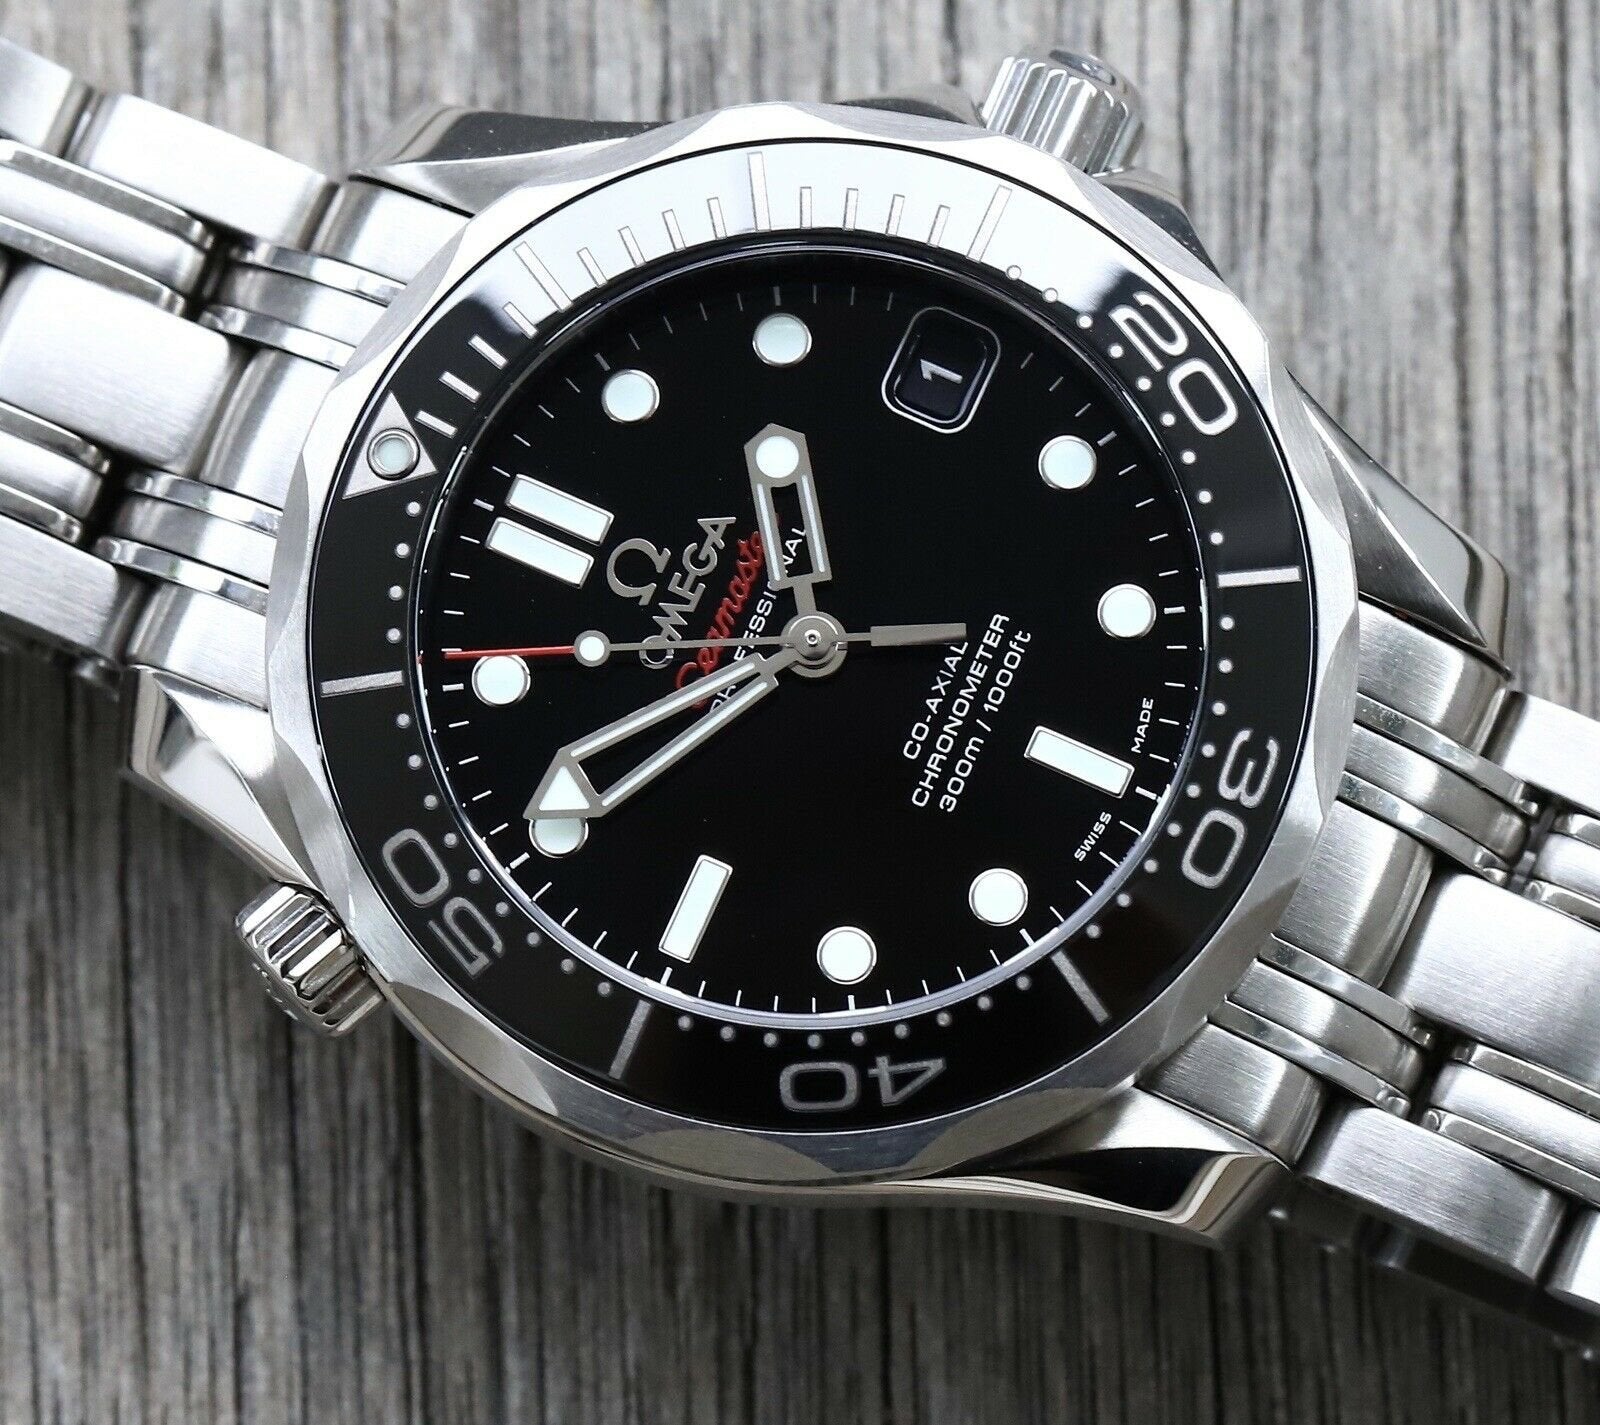 Omega_Seamaster_Diver_300M_Co-Axial_Black_36.25mm_212.30.36.20.01.002_-_2019_Watch_Vault_02.jpg